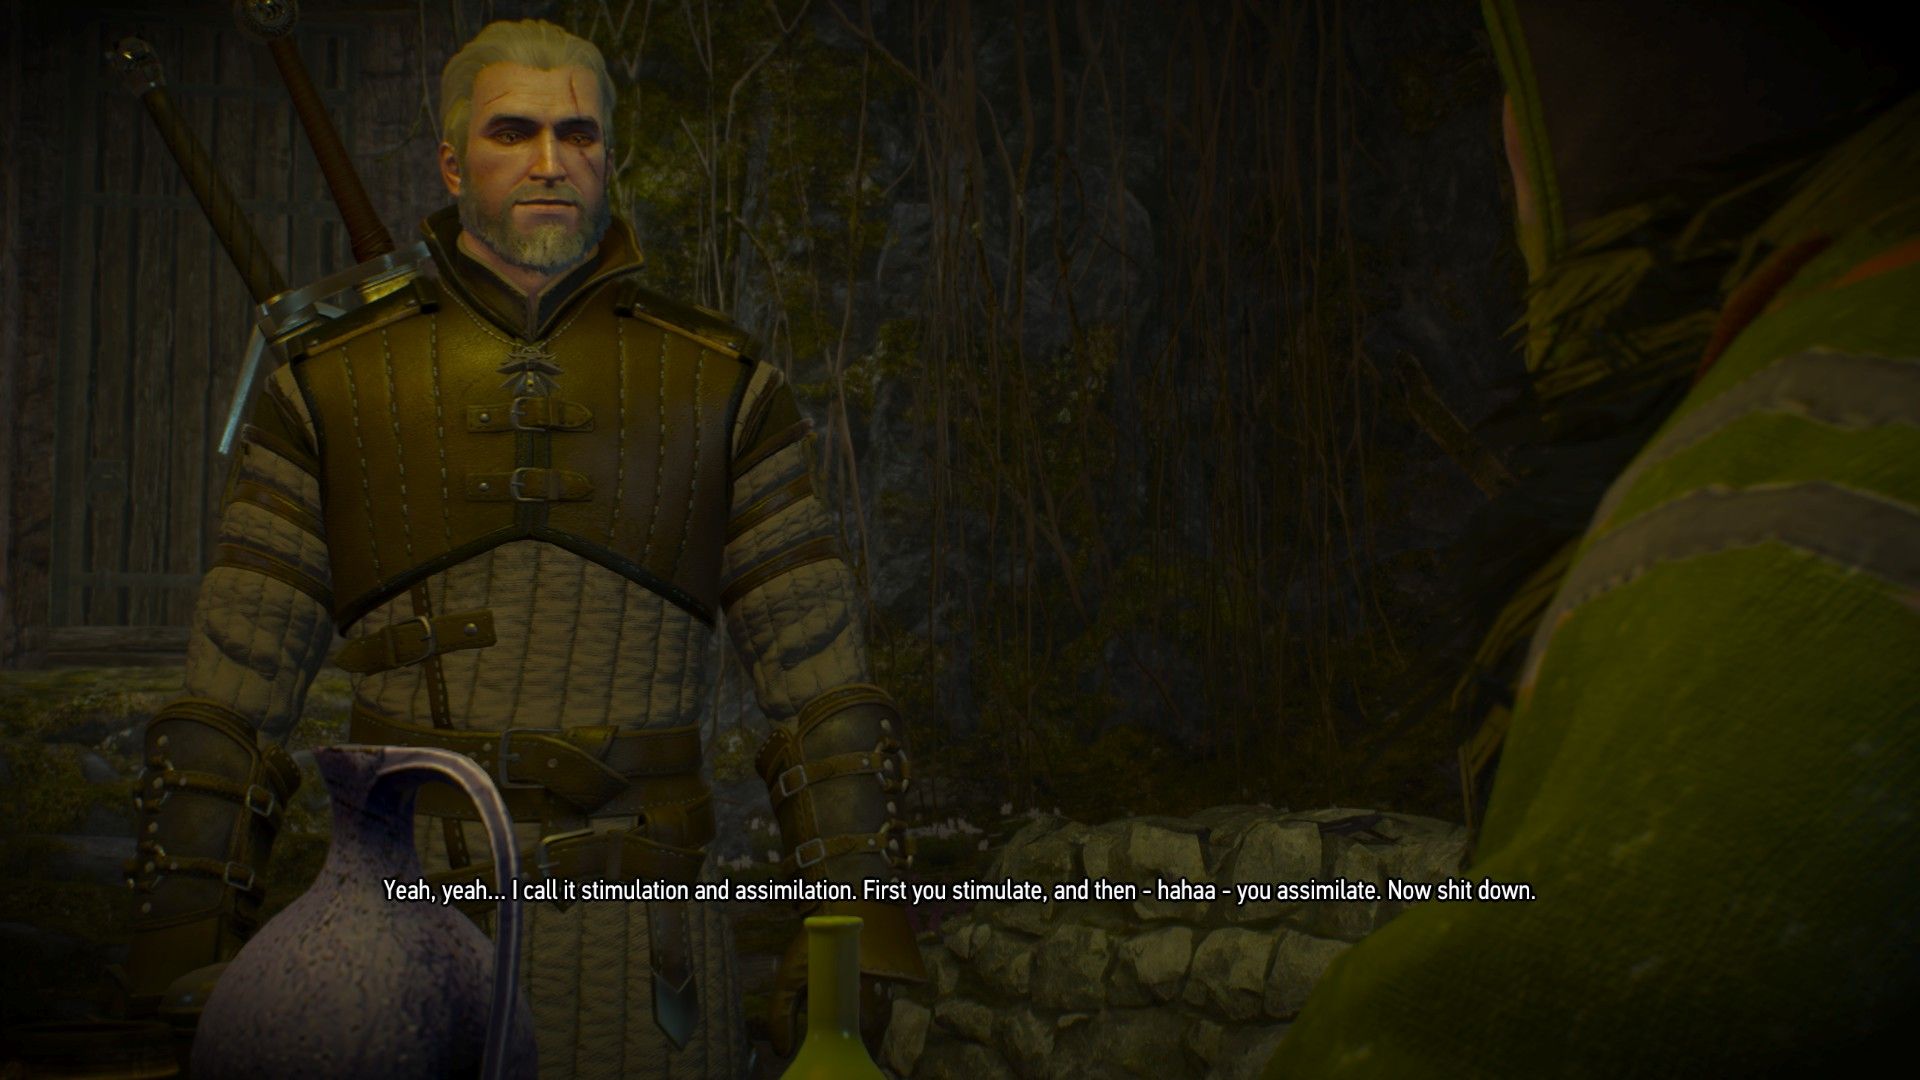 Geralt smiles happily as he is invited to drink with the old druids.